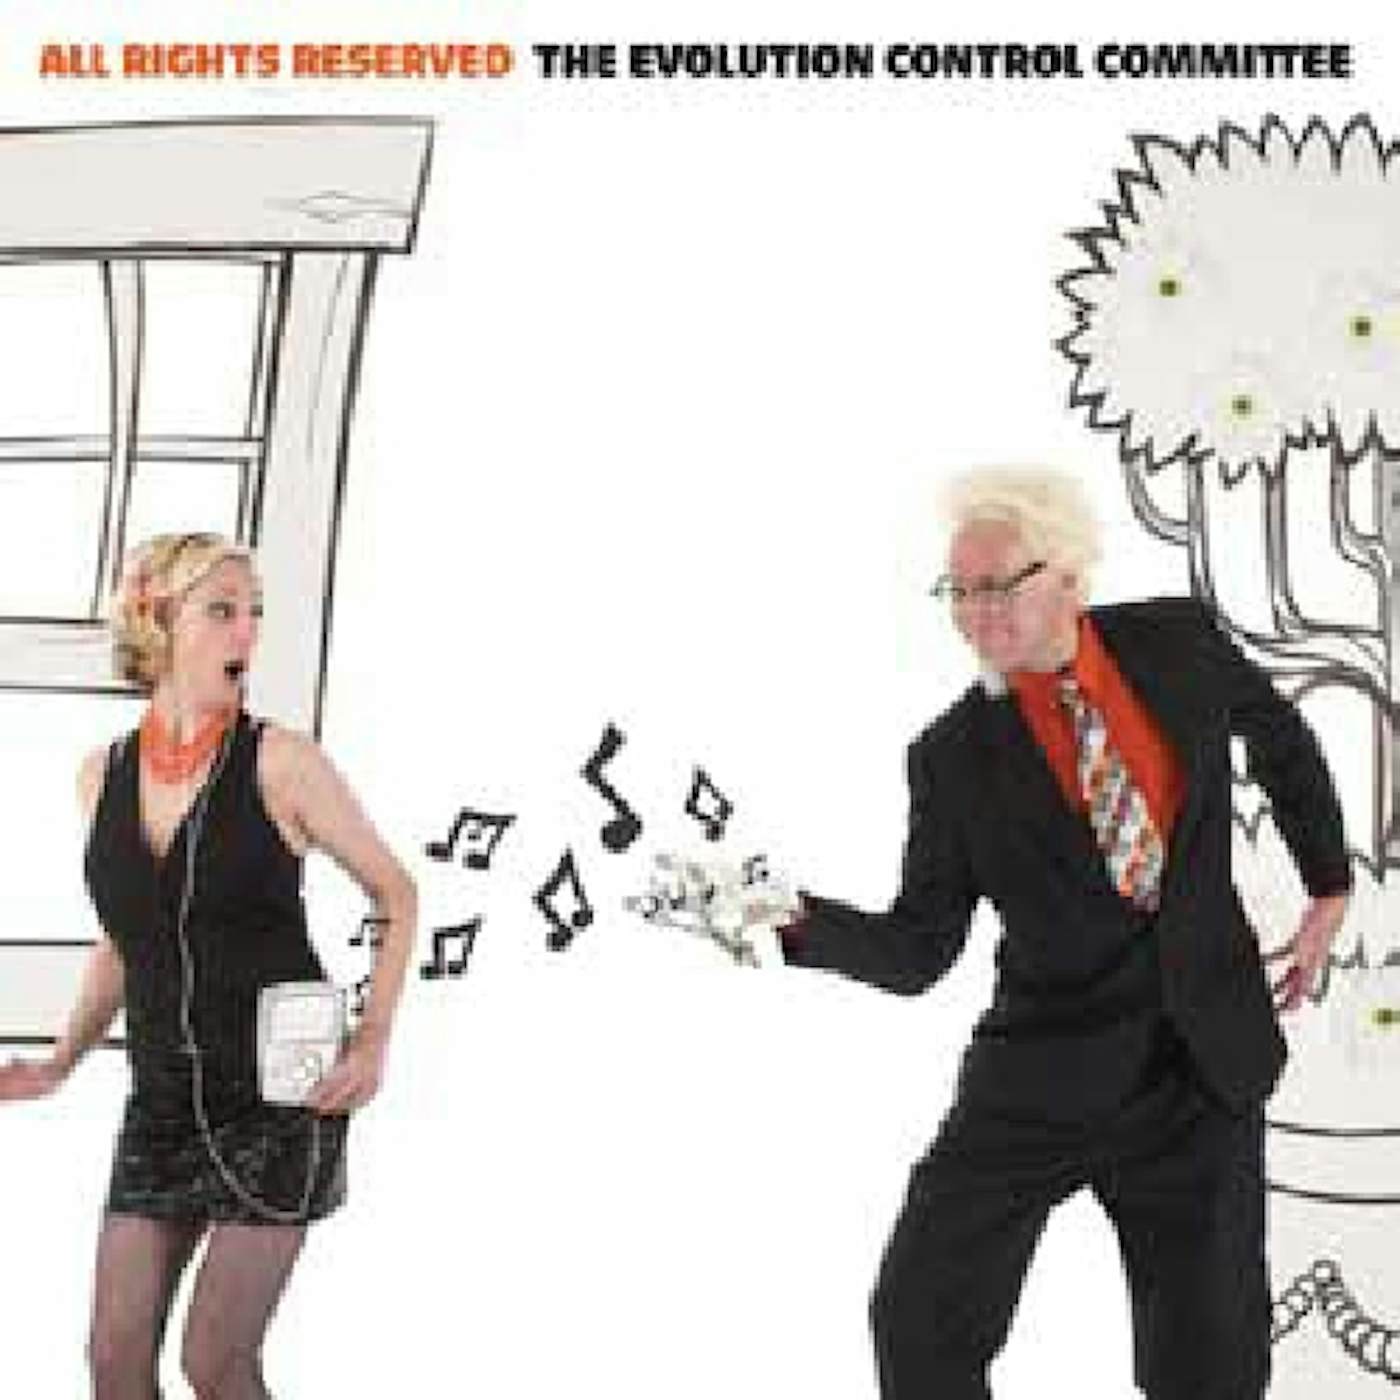 The Evolution Control Committee ALL RIGHTS RESERVED CD